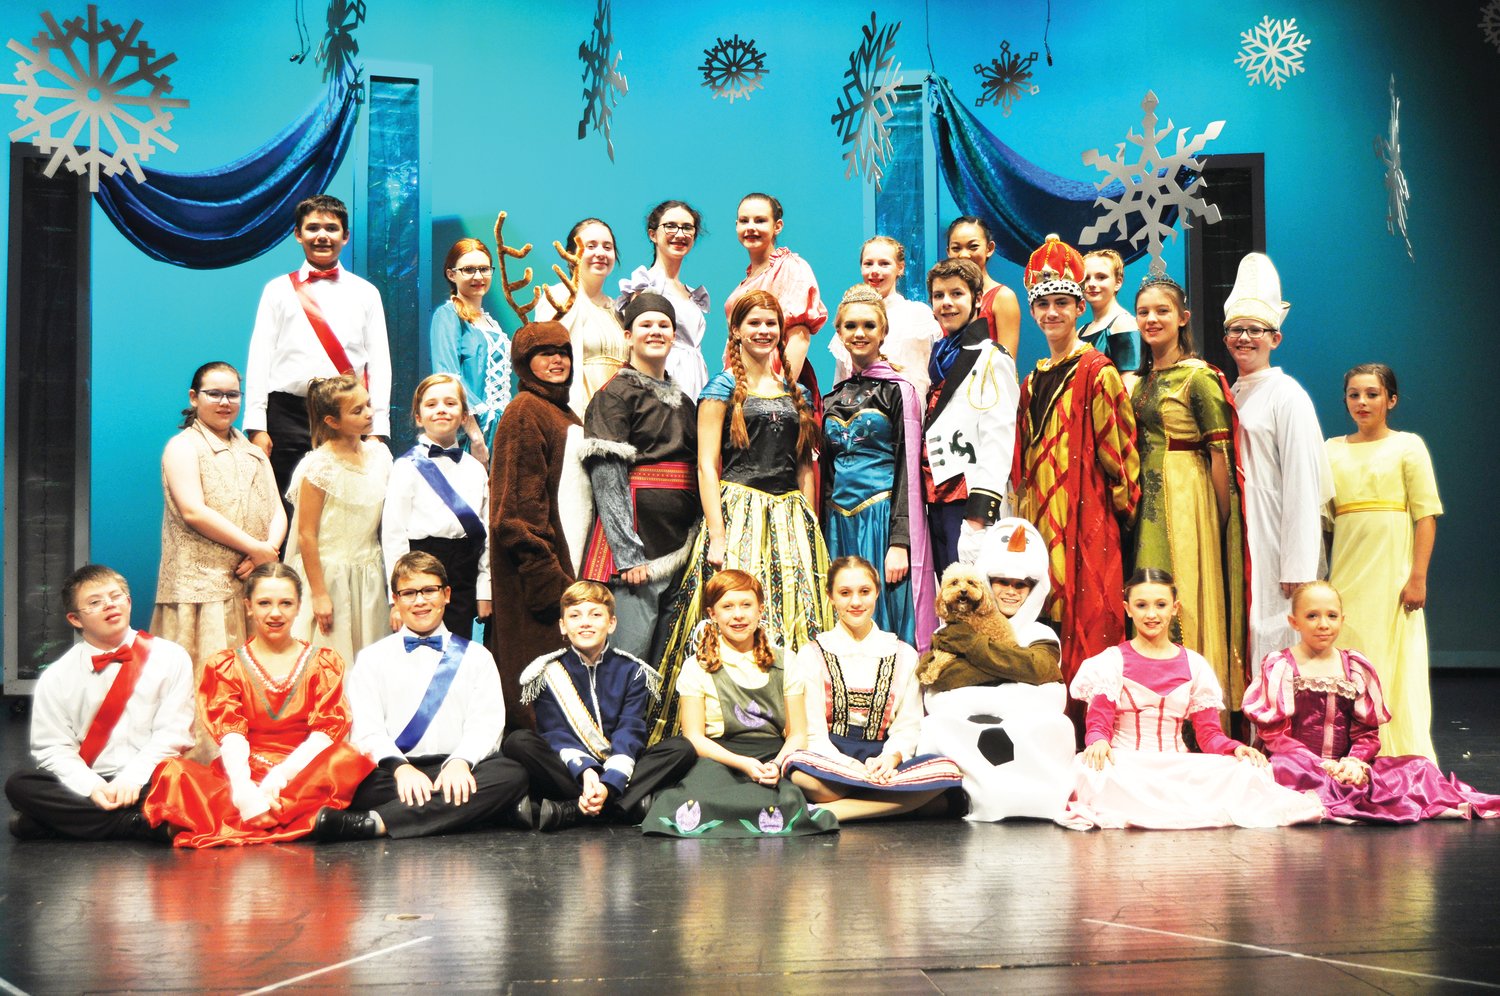 Crawfordsville Middle School's "Frozen Jr." takes the stage this weekend at Crawfordsville High School.